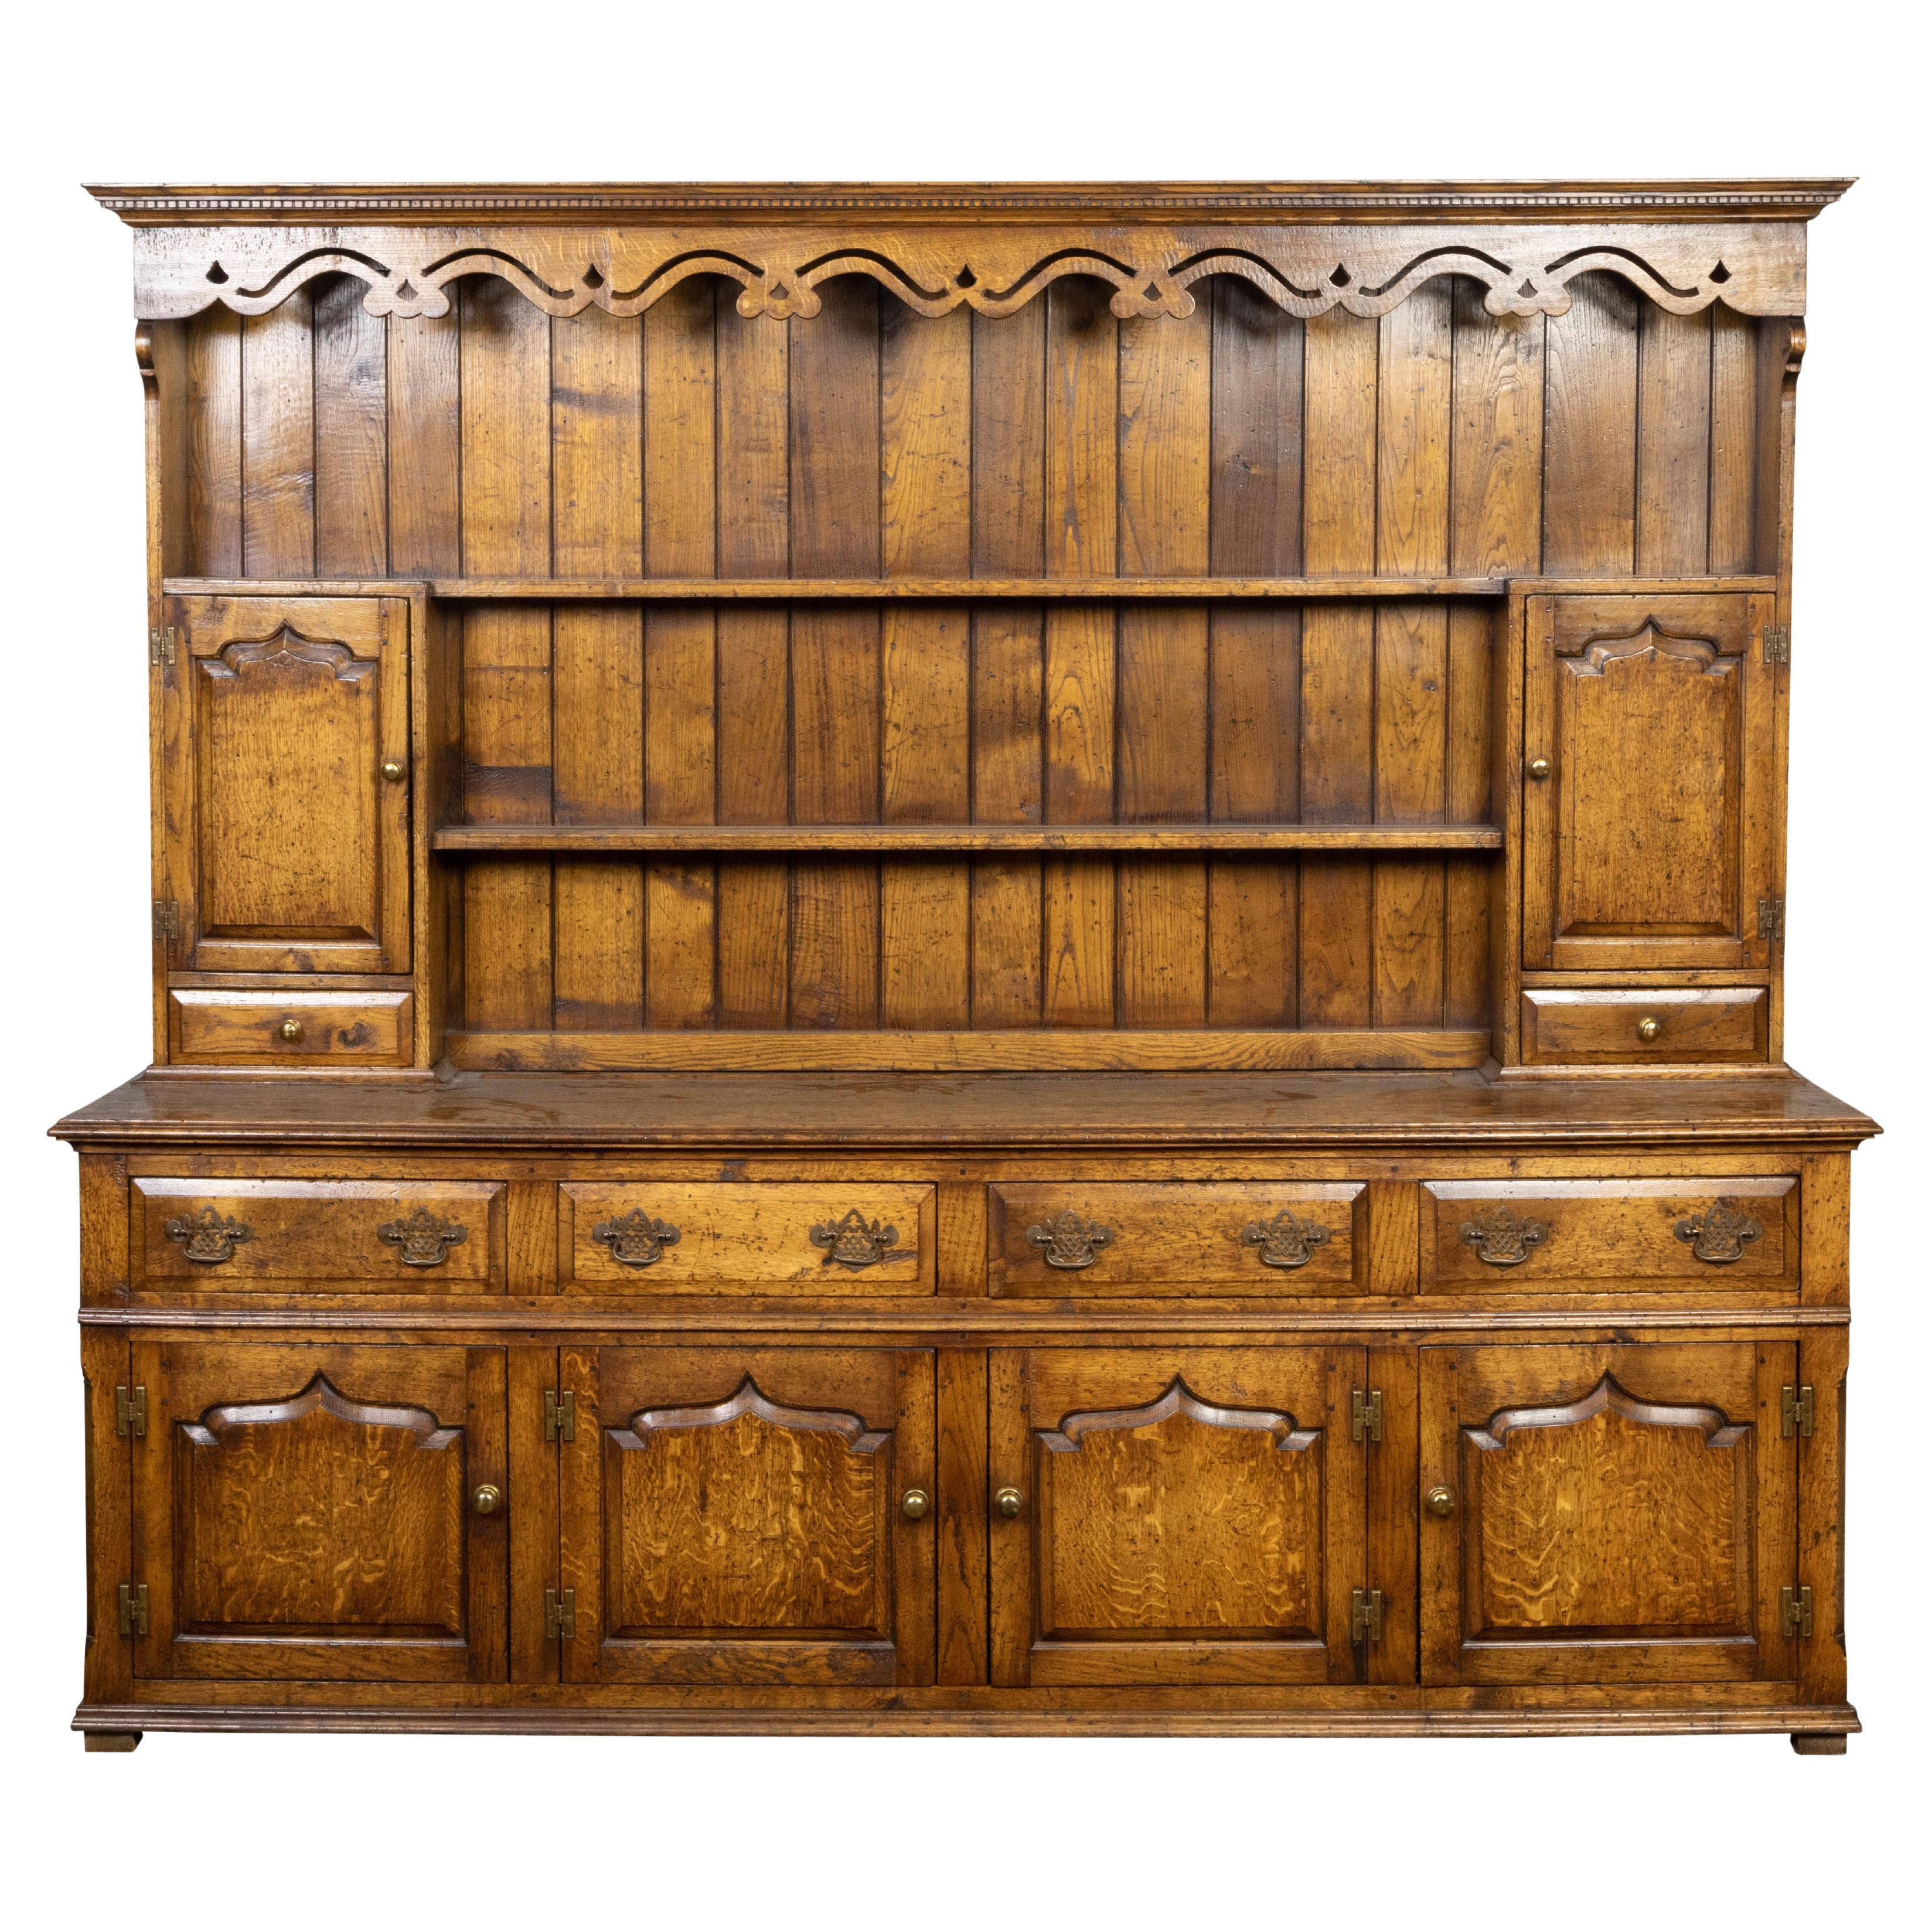 English Midcentury Oak Dresser with Carved Accents, Six Doors and Six Drawers